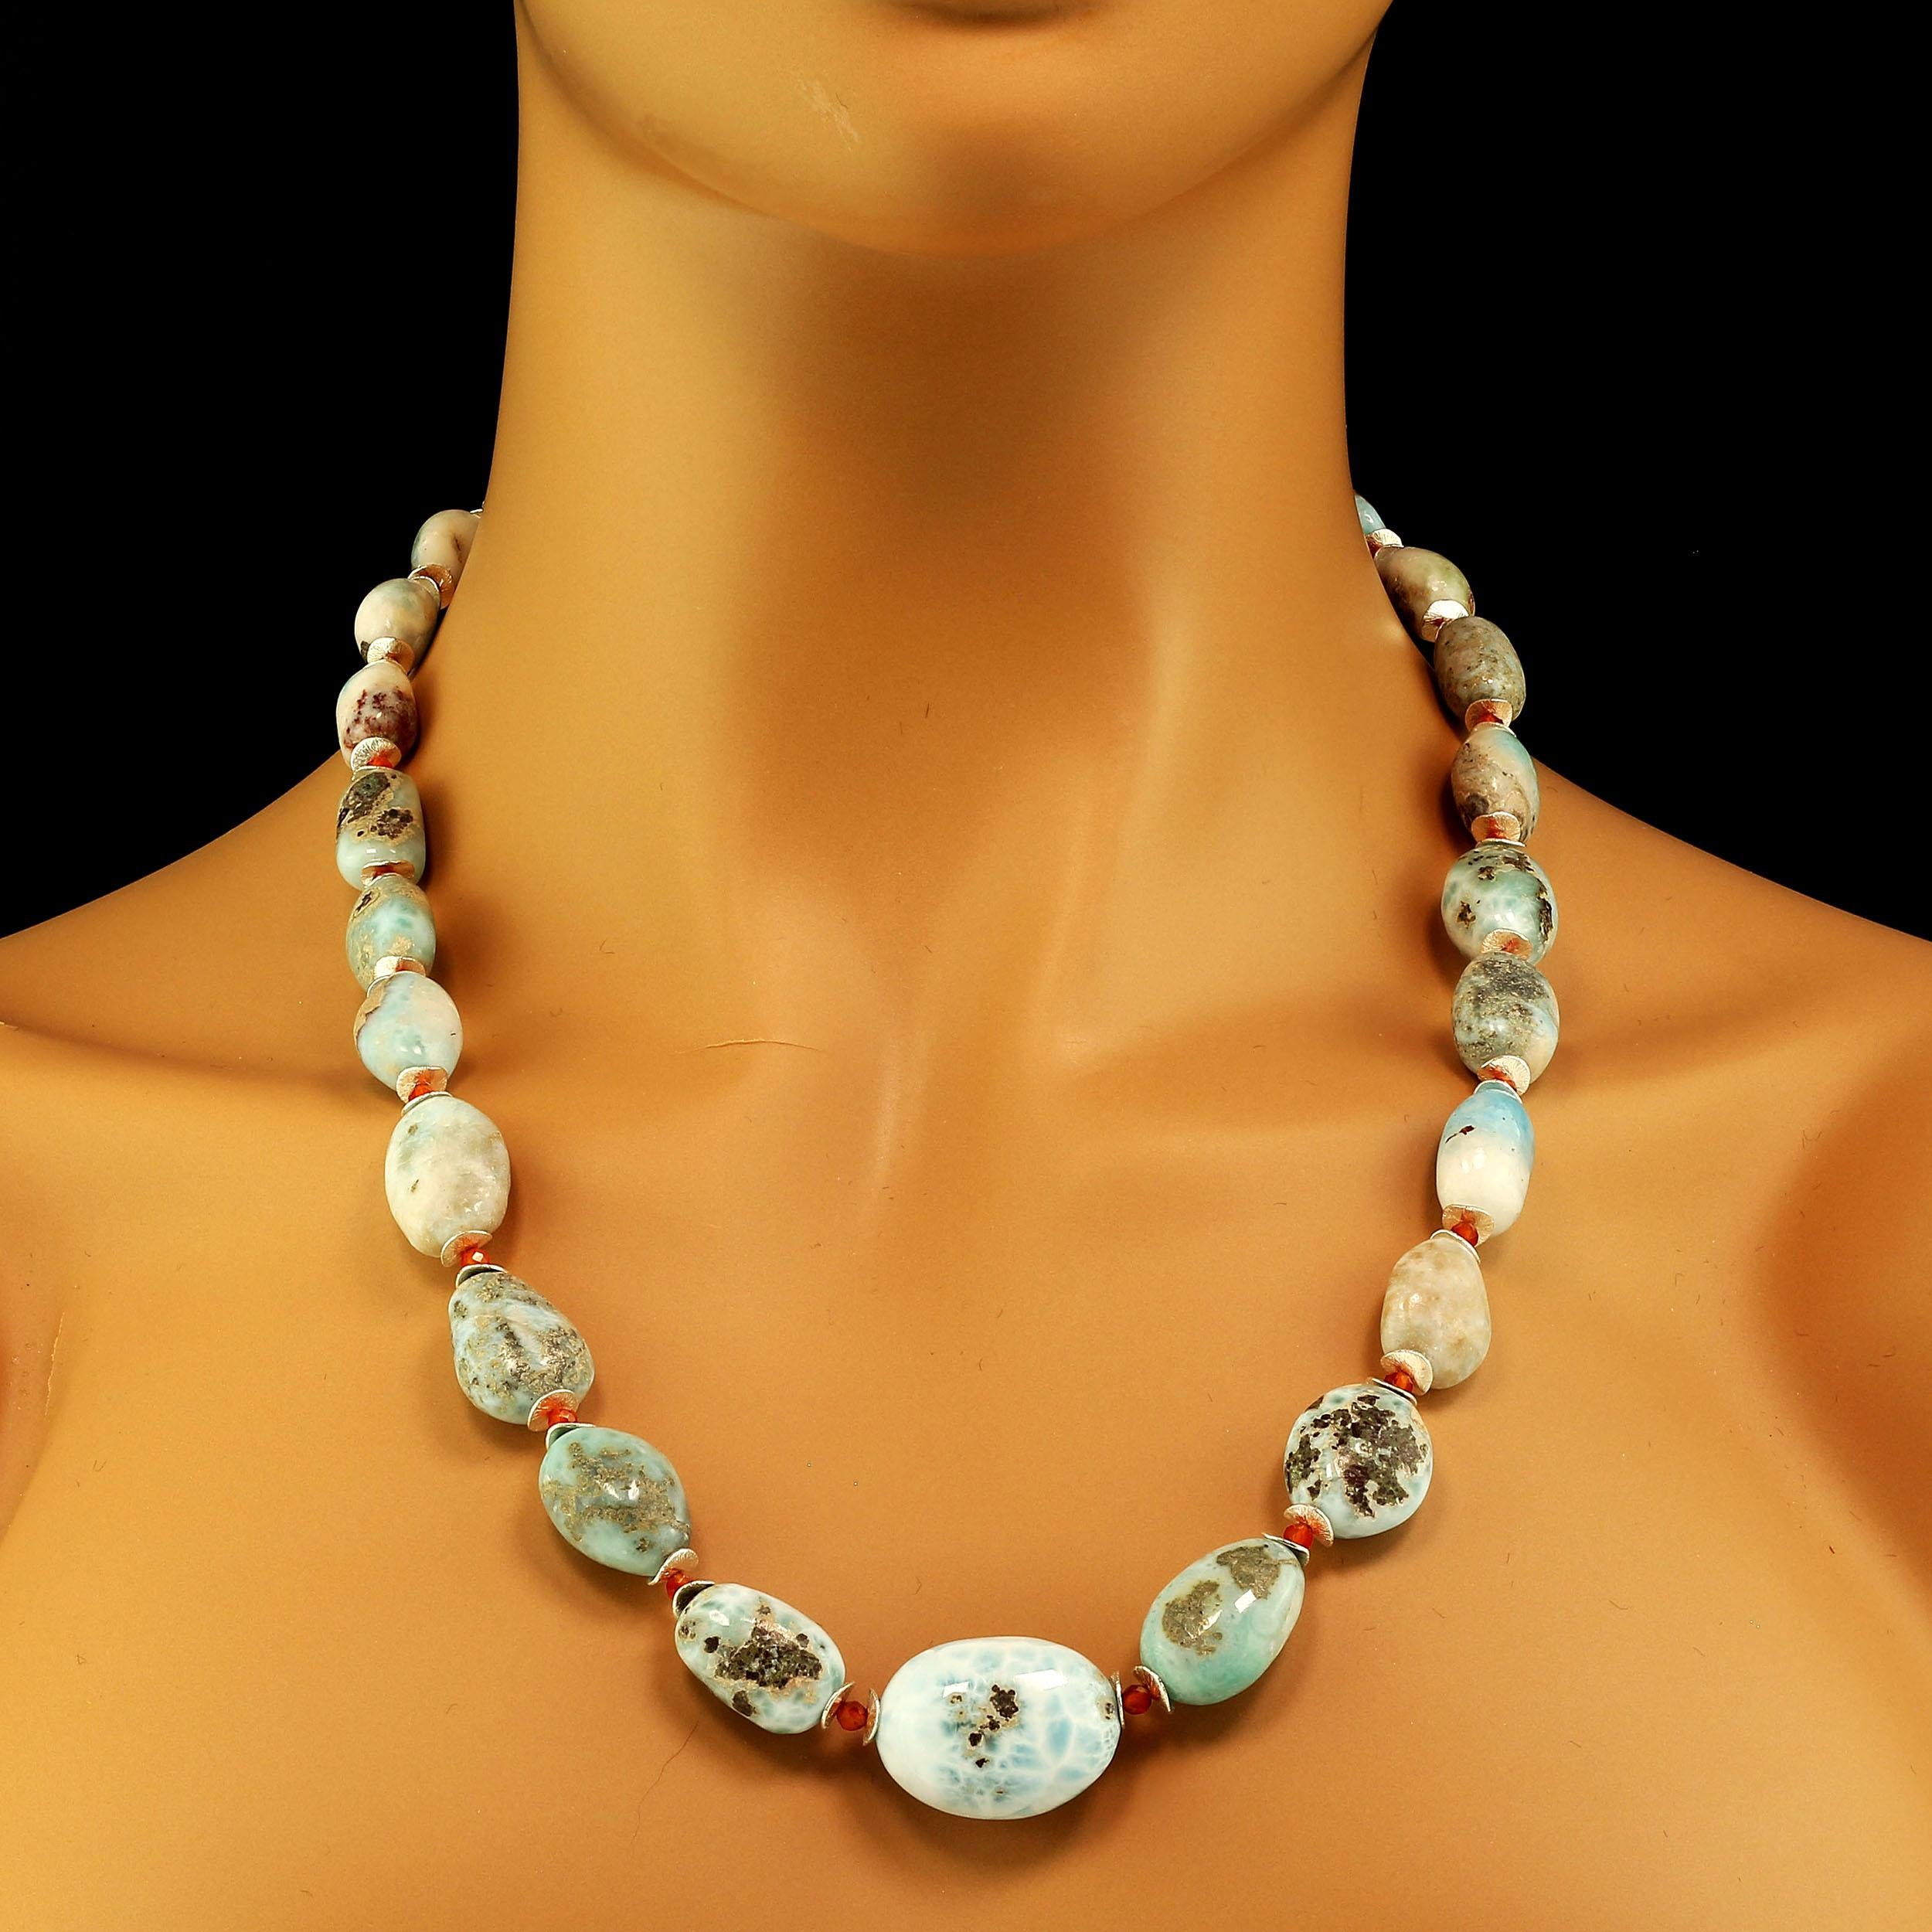 Artisan AJD 23 Inch Graduated Blue Larimar Necklace with Sterling Silver Clasp